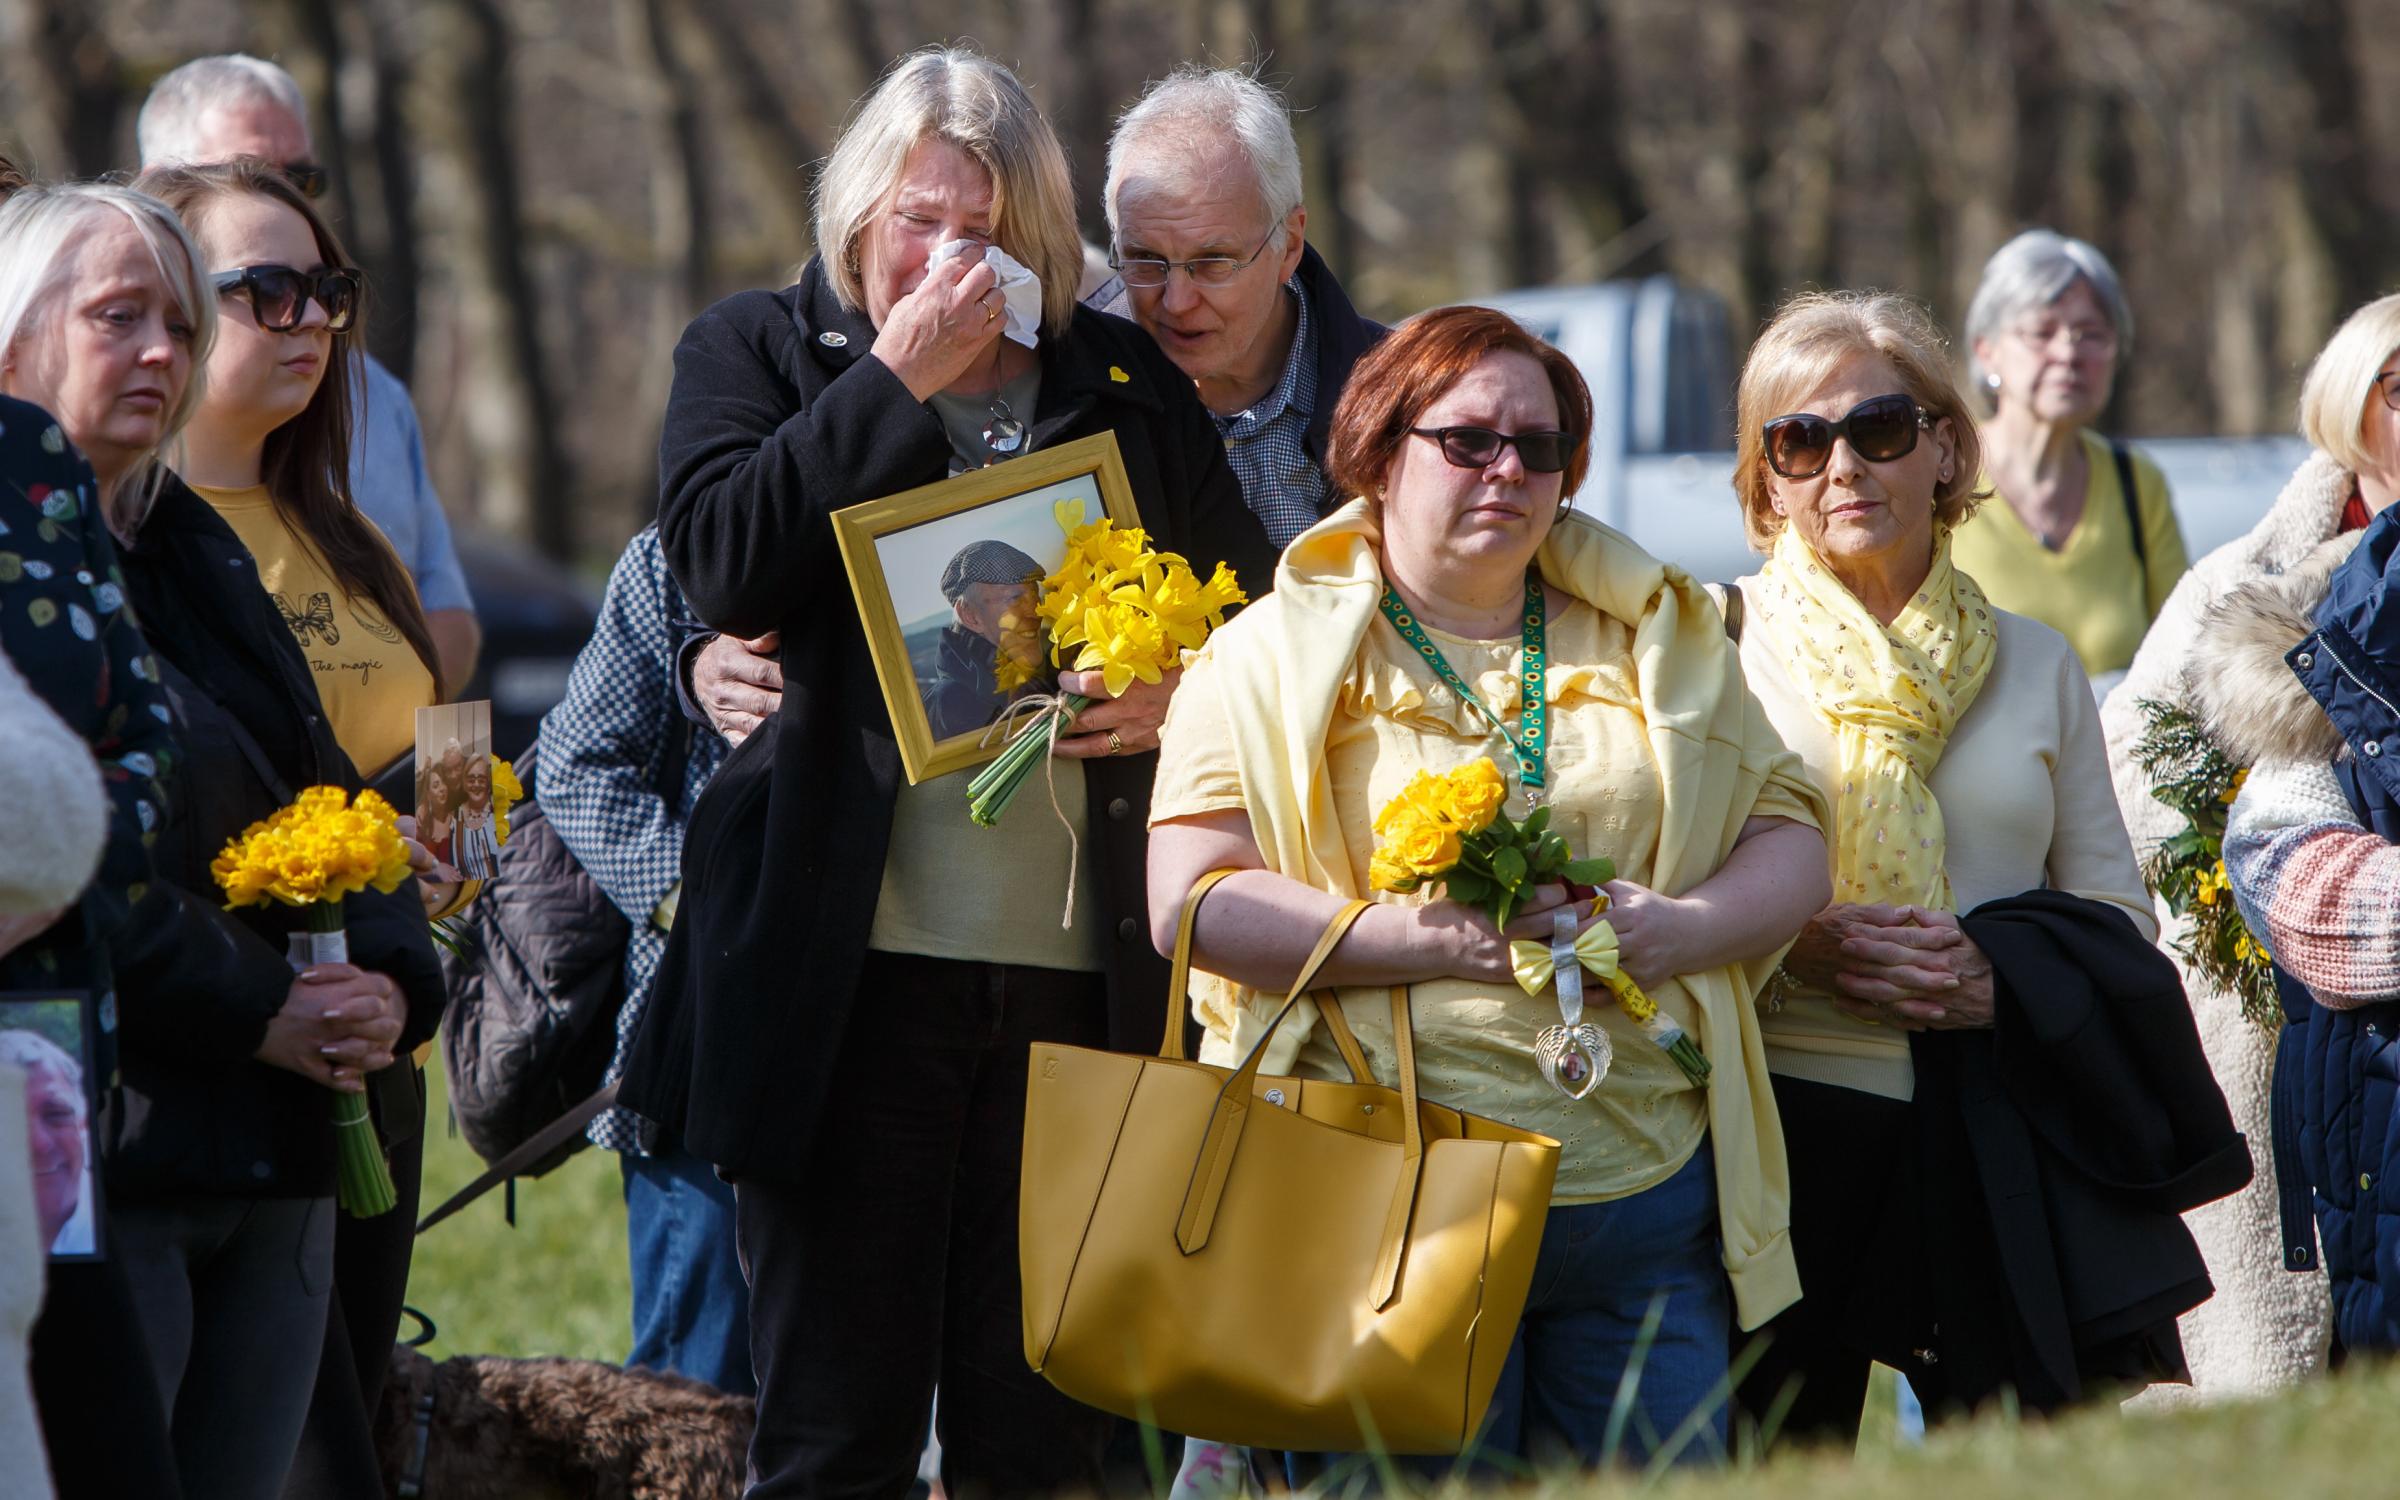 People pictured during a minutes silence for those lost to Covid at Riverside Grove in Pollok Country Park in Glasgow. Riverside Grove is the key focal point of The Heralds Covid memorial. Photograph by Colin Mearns.